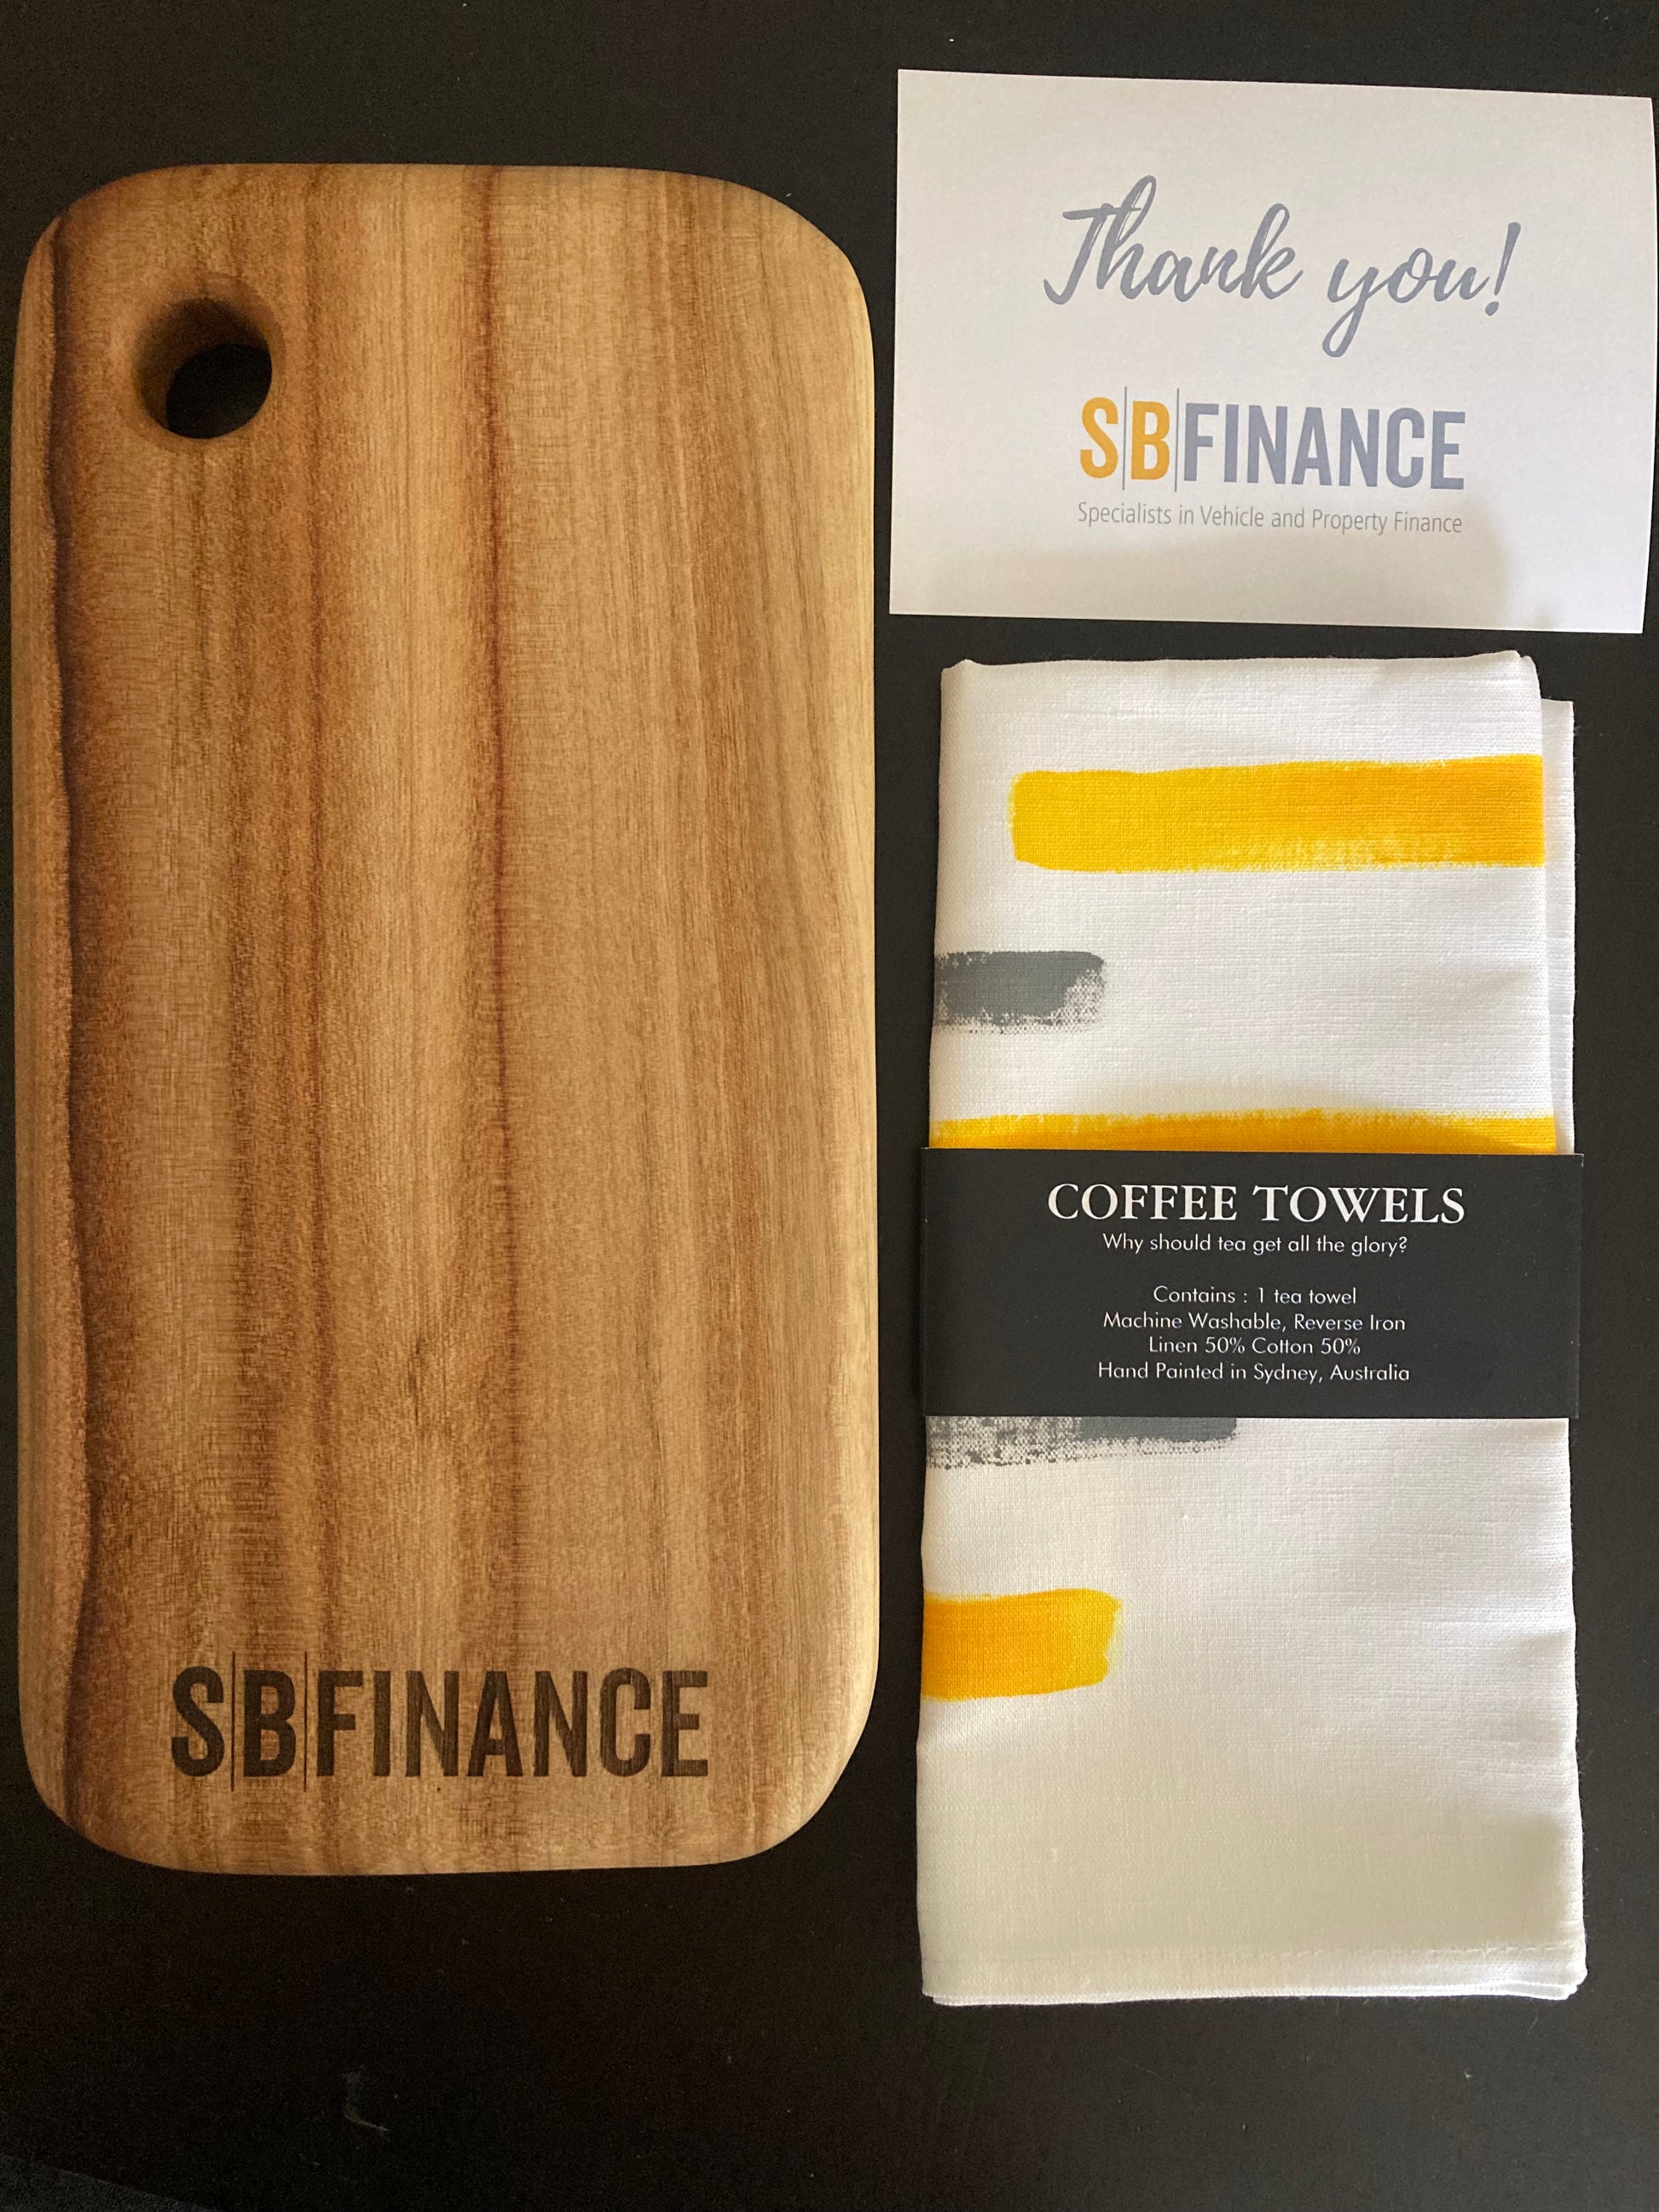 Branded Timber Cheese board with branded cards